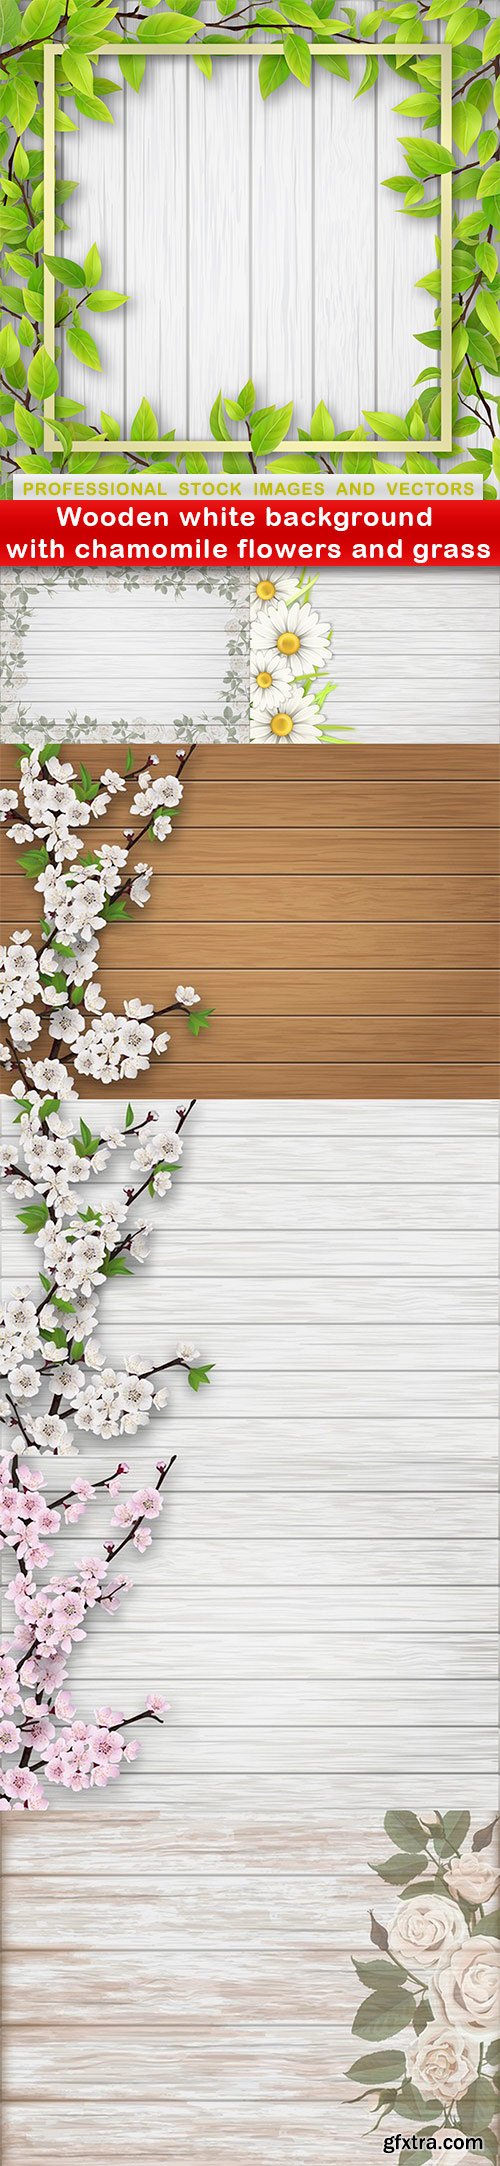 Wooden white background with chamomile flowers and grass - 7 EPS